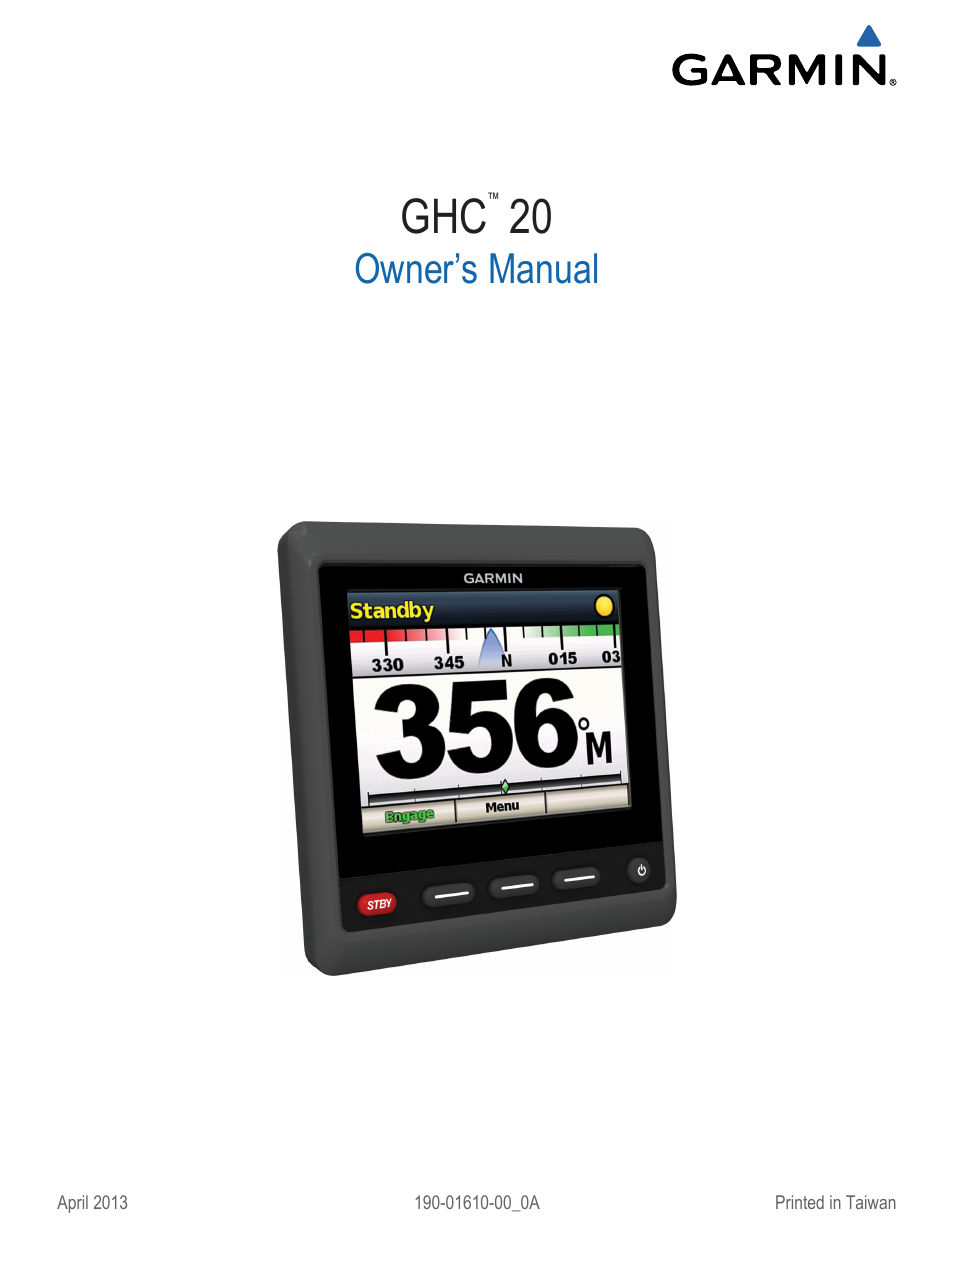 Garmin GHC 20 User Manual | 8 pages